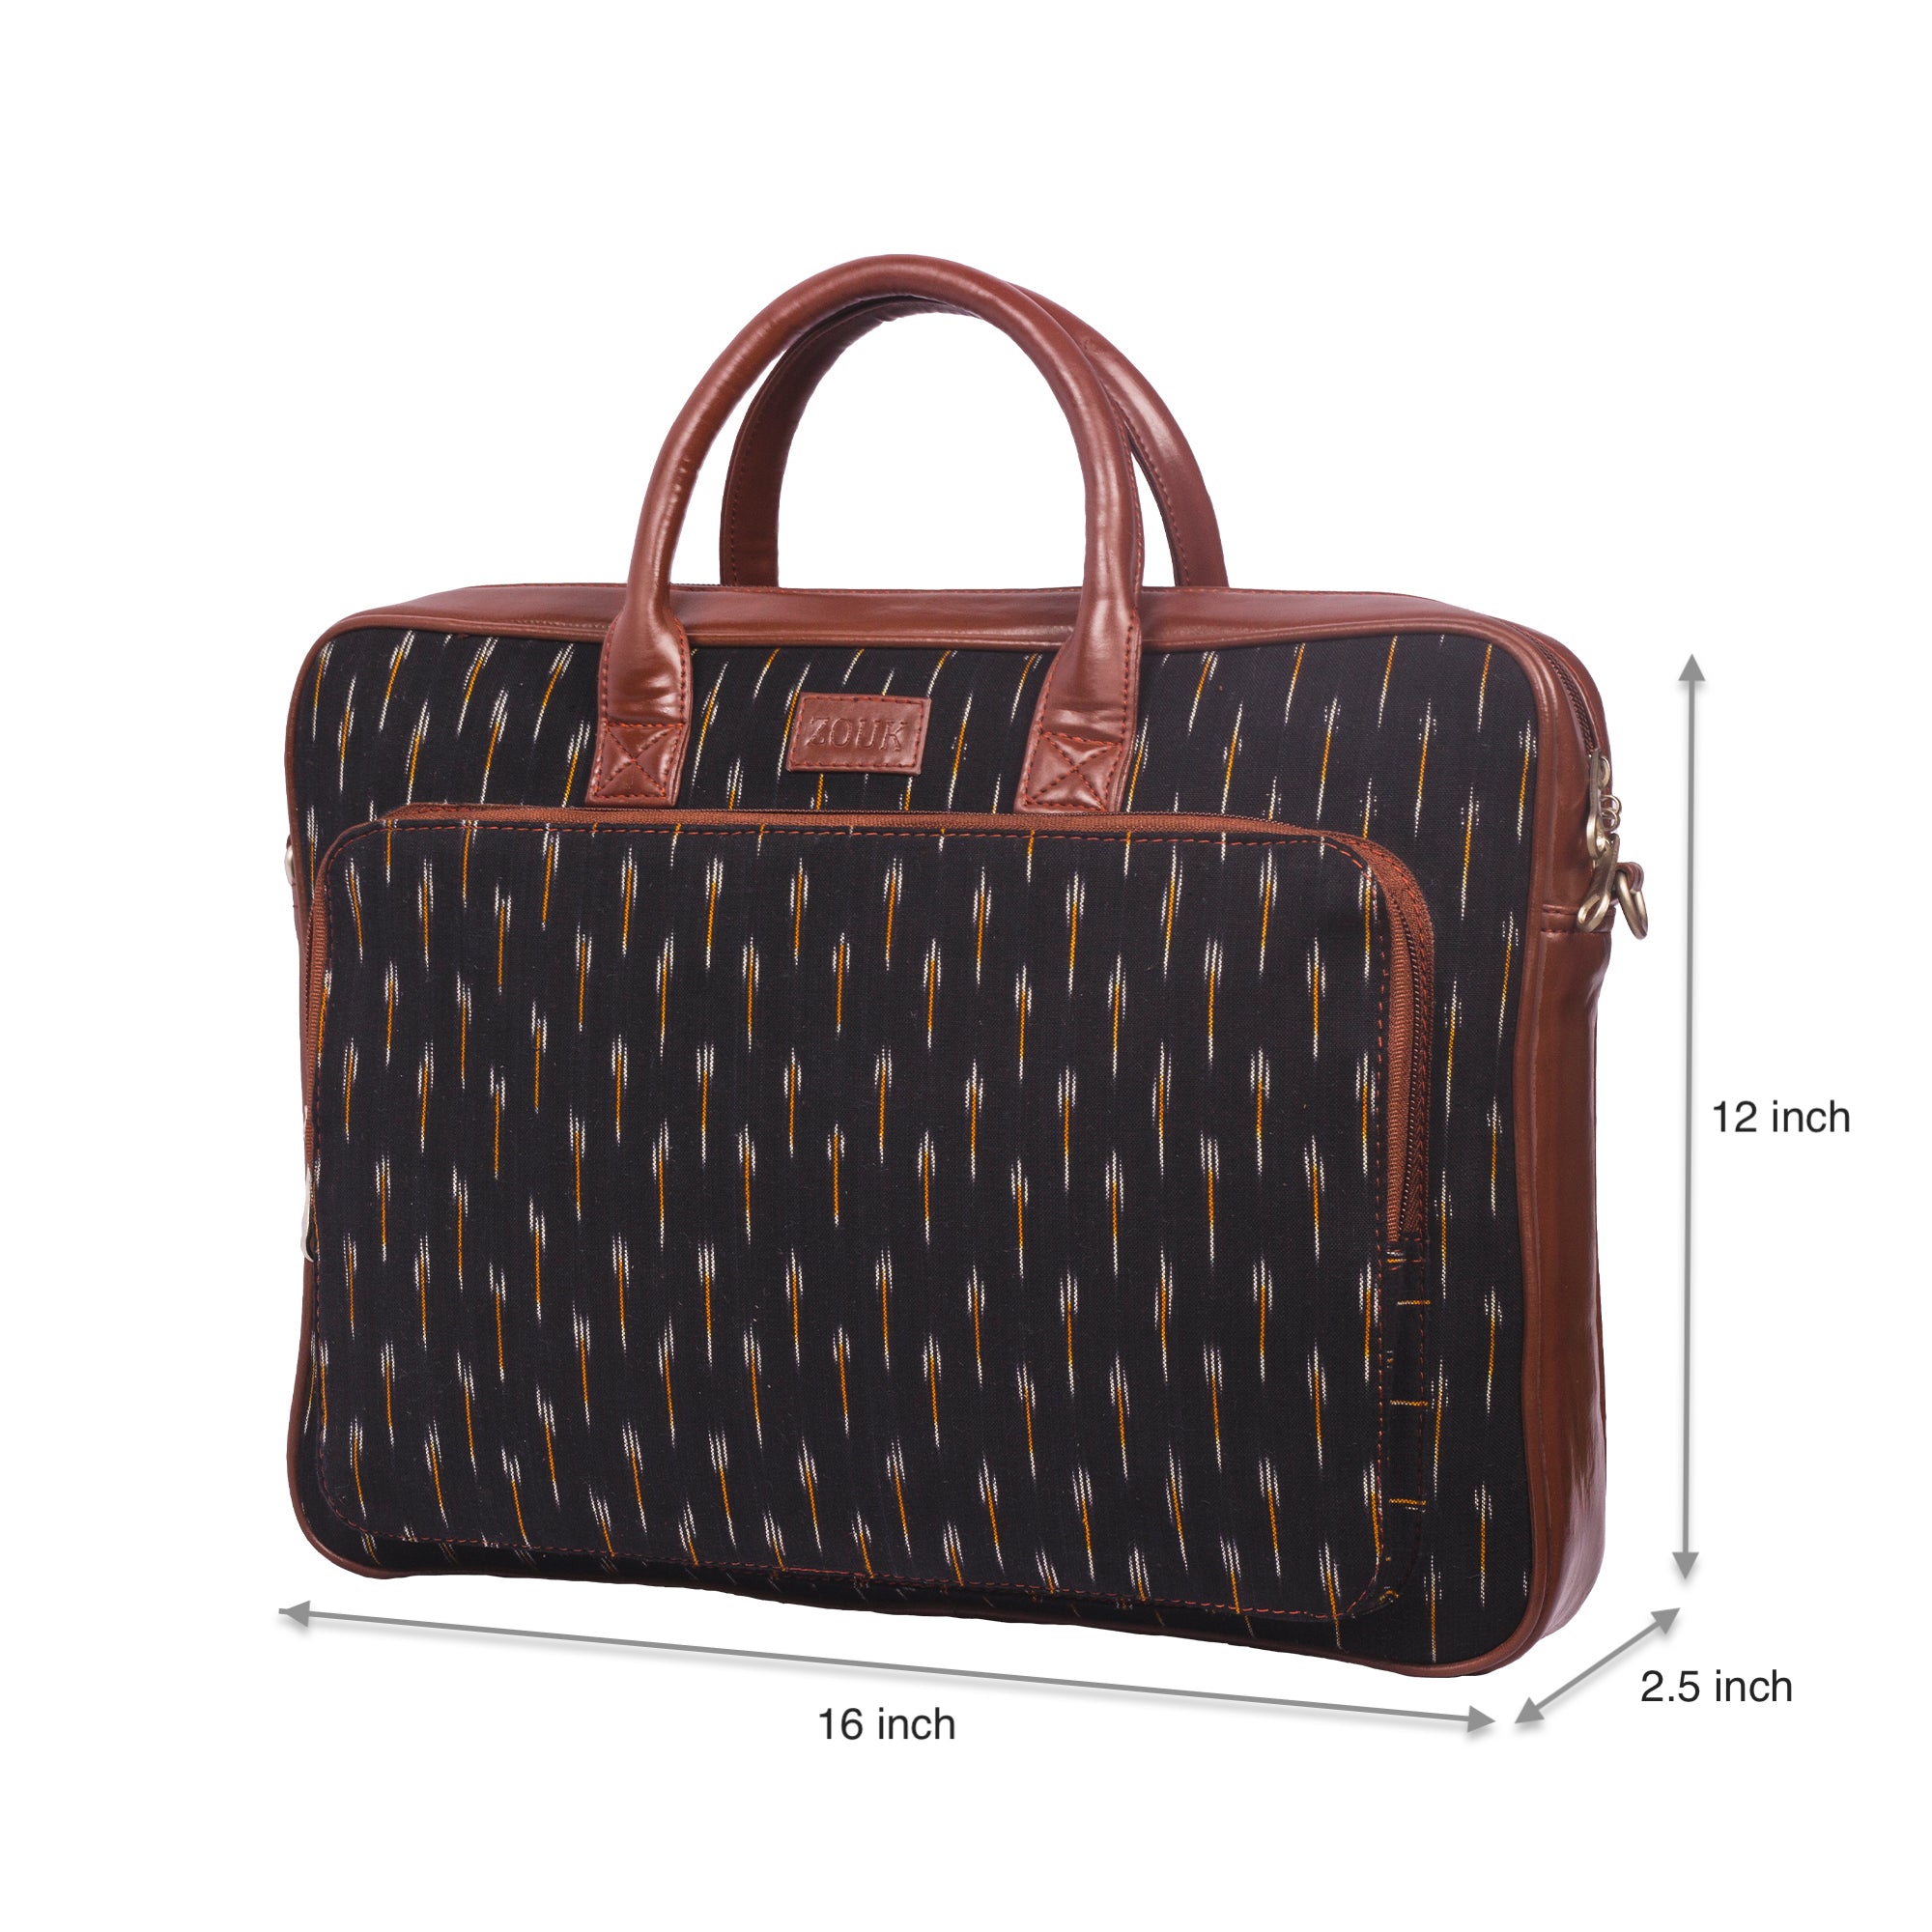 Ikat GreRe Laptop Bag with dimensions